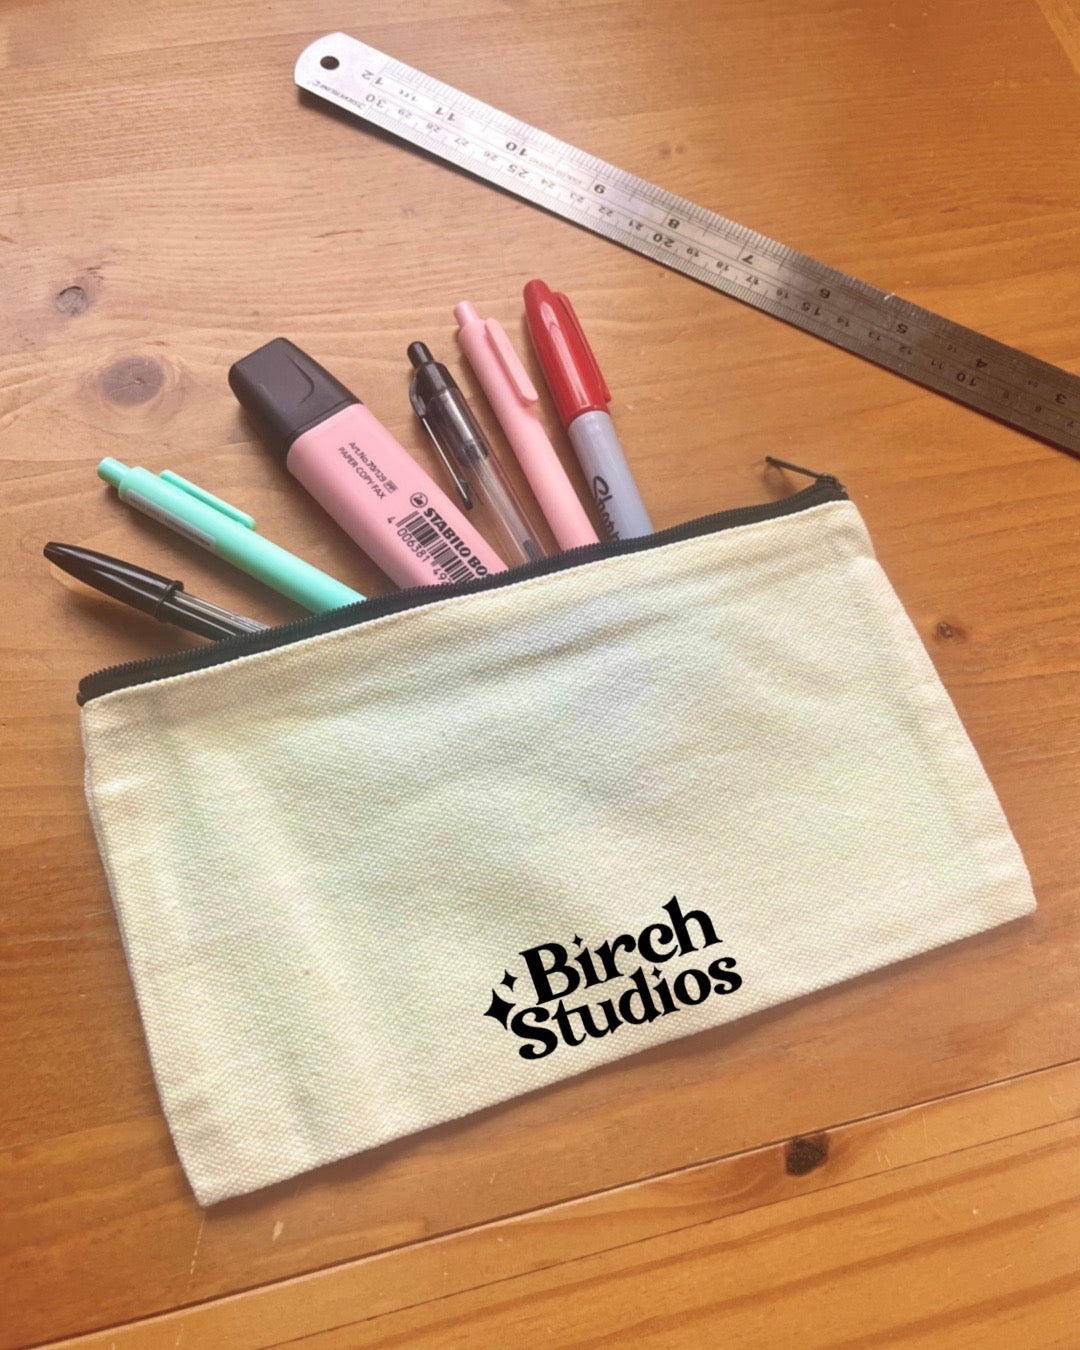 Taylor's Version | Taylor Swift | Pencil Case | Makeup Bag | Small Zipped Pouch